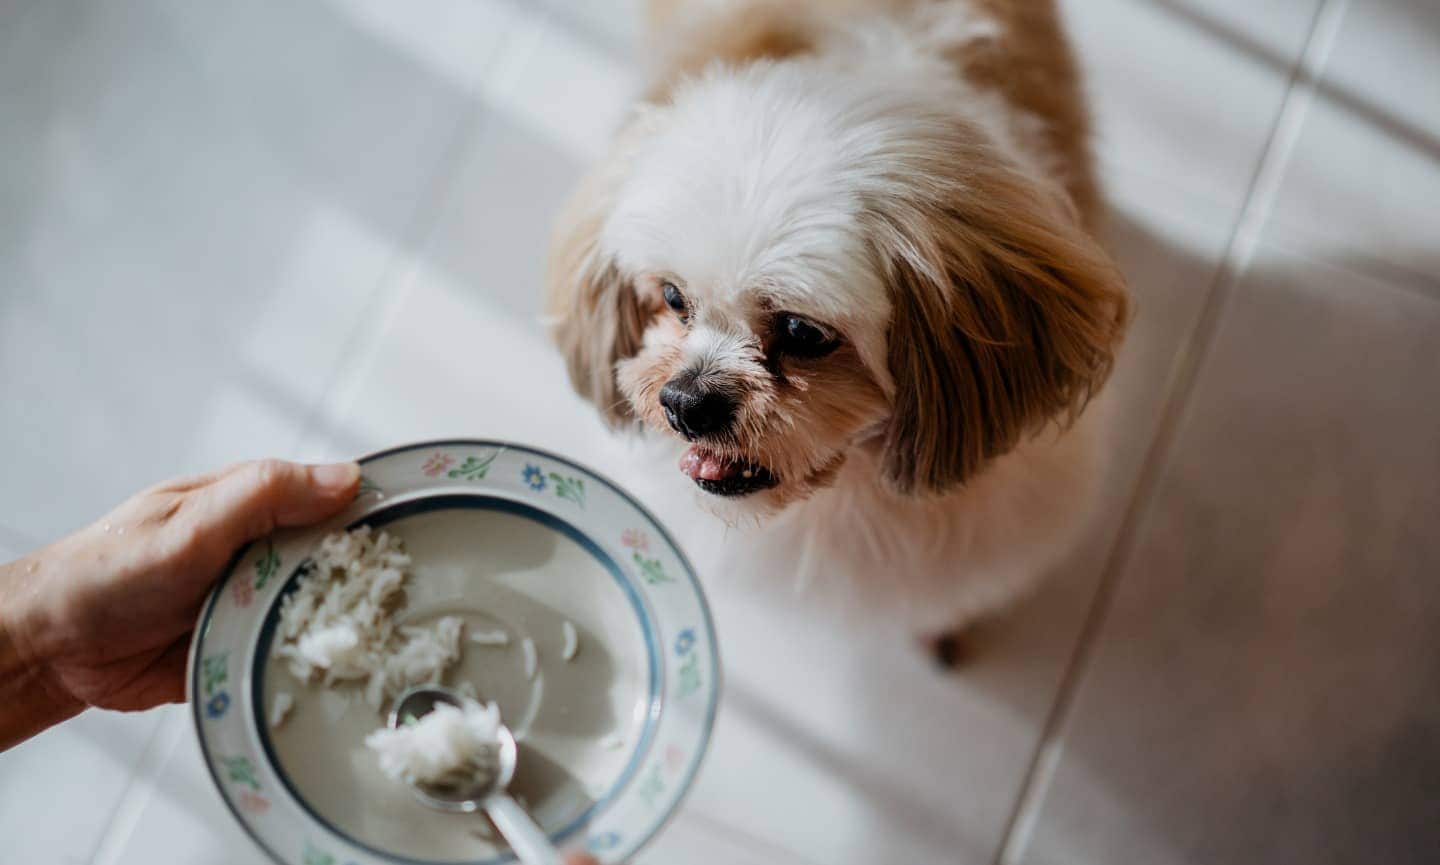 What Do You Feed a Dog With Diarrhea? Try These 6 Foods